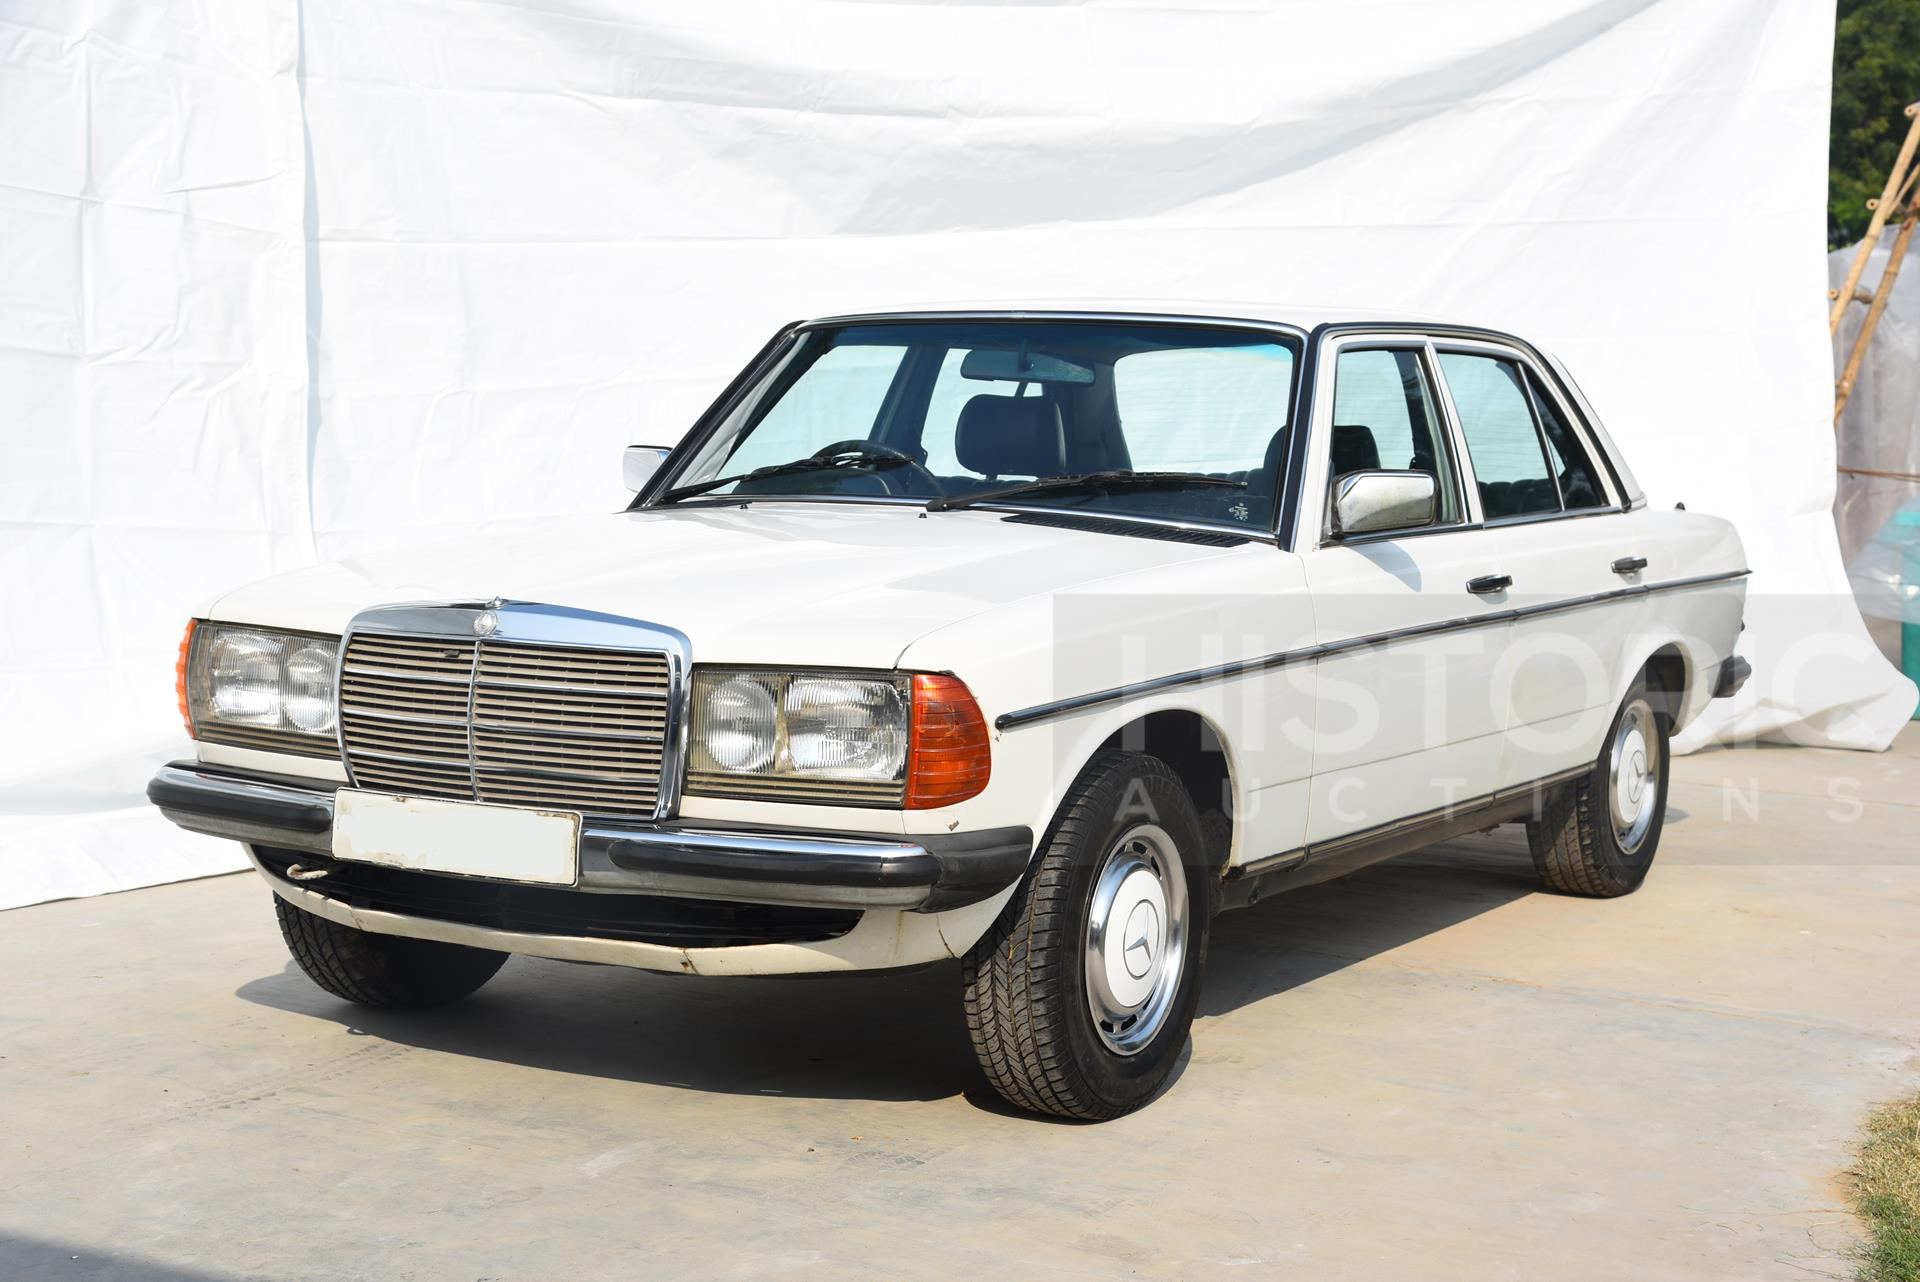 1982 Mercedes Benz 200 W123 – For Charity